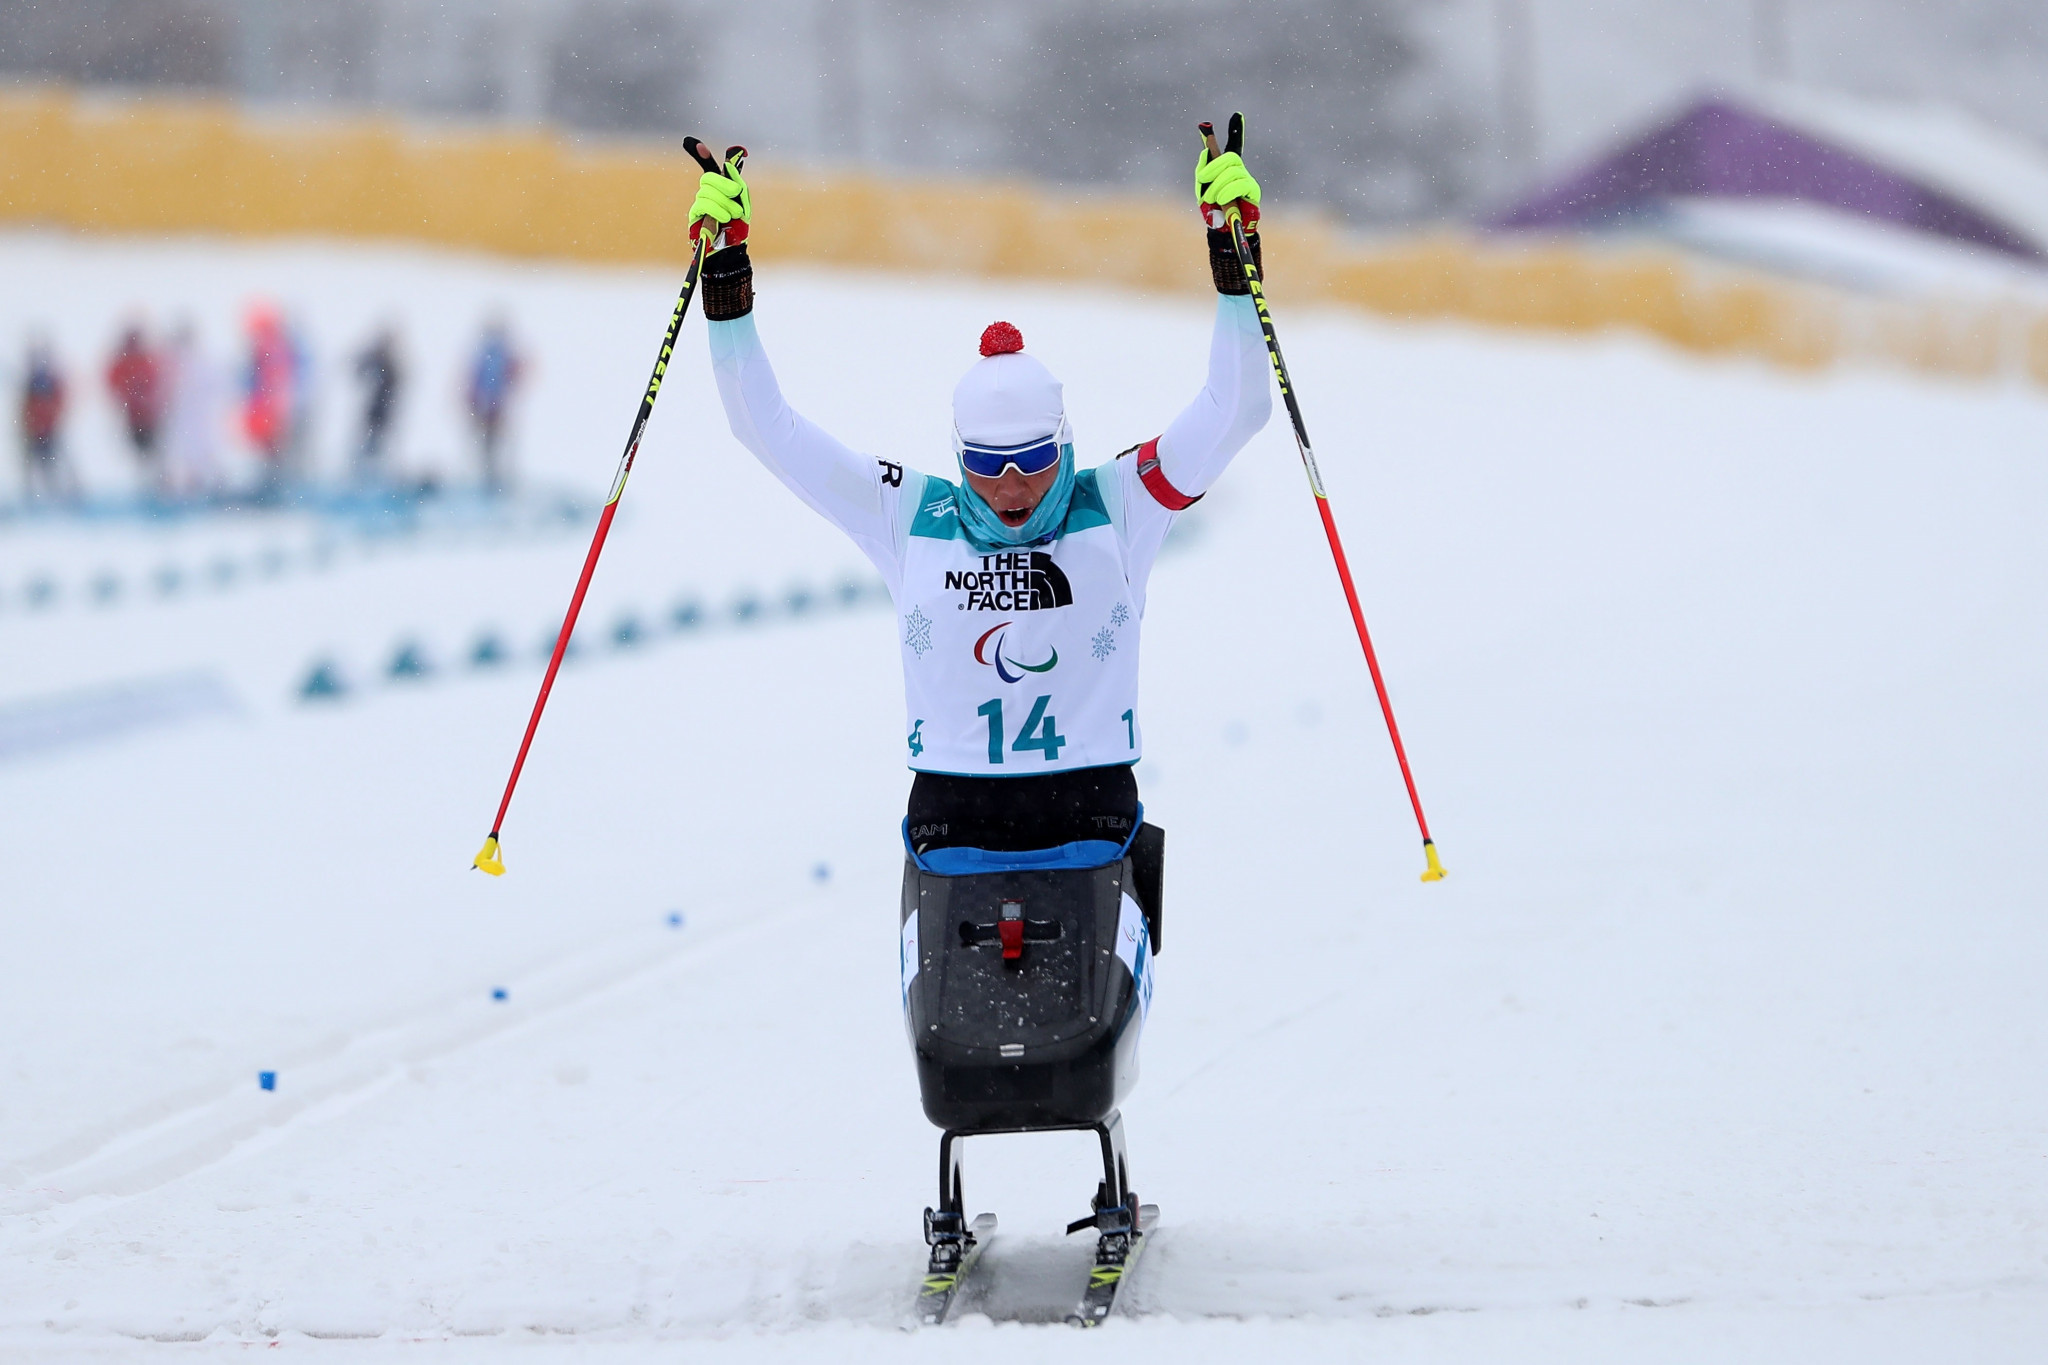 Eskau and Fleig secure double sitting biathlon gold for Germany as Pyeongchang 2018 Paralympics medal action resumes